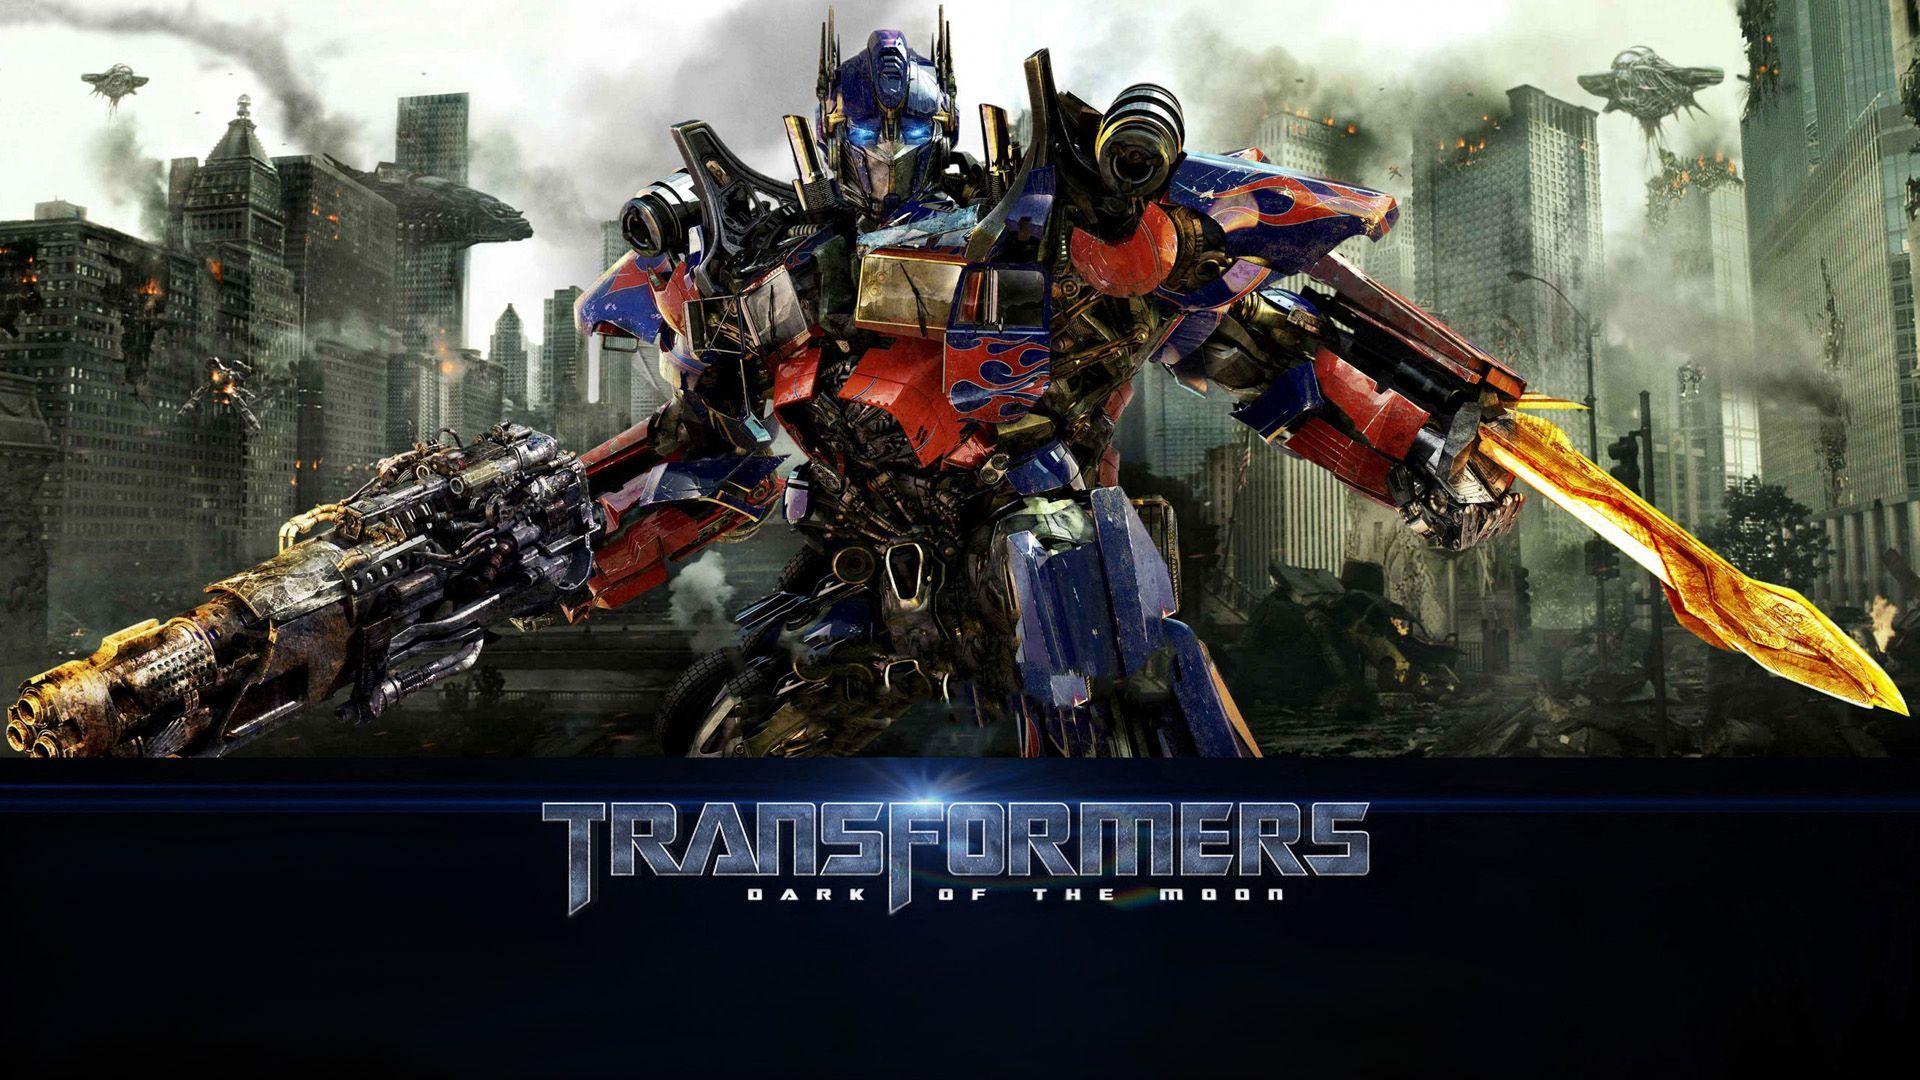 Optimus Prime screenshots, image and picture